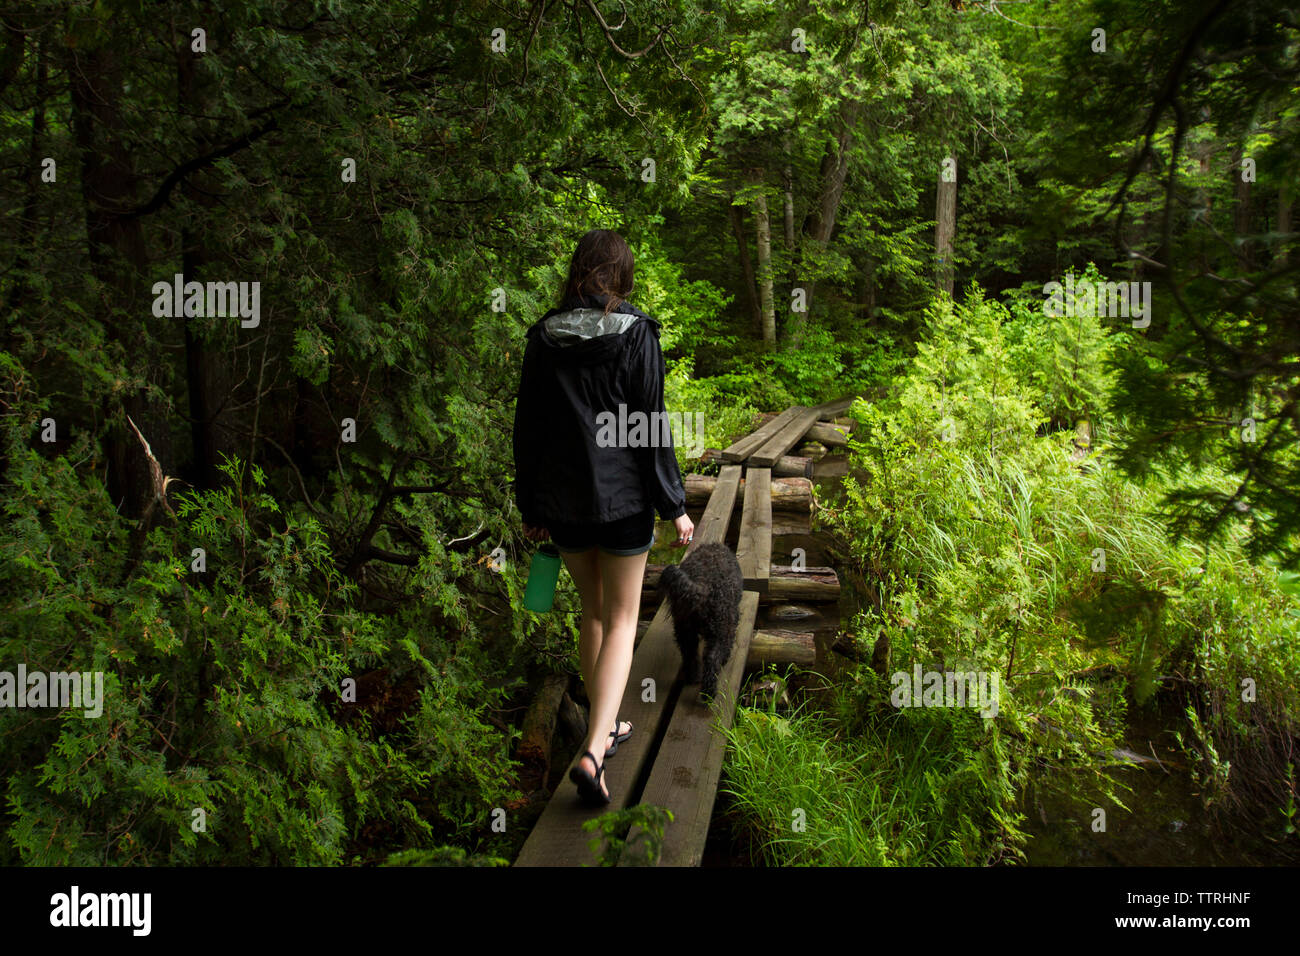 Rear view of woman with dog walking on boardwalk in forest Banque D'Images